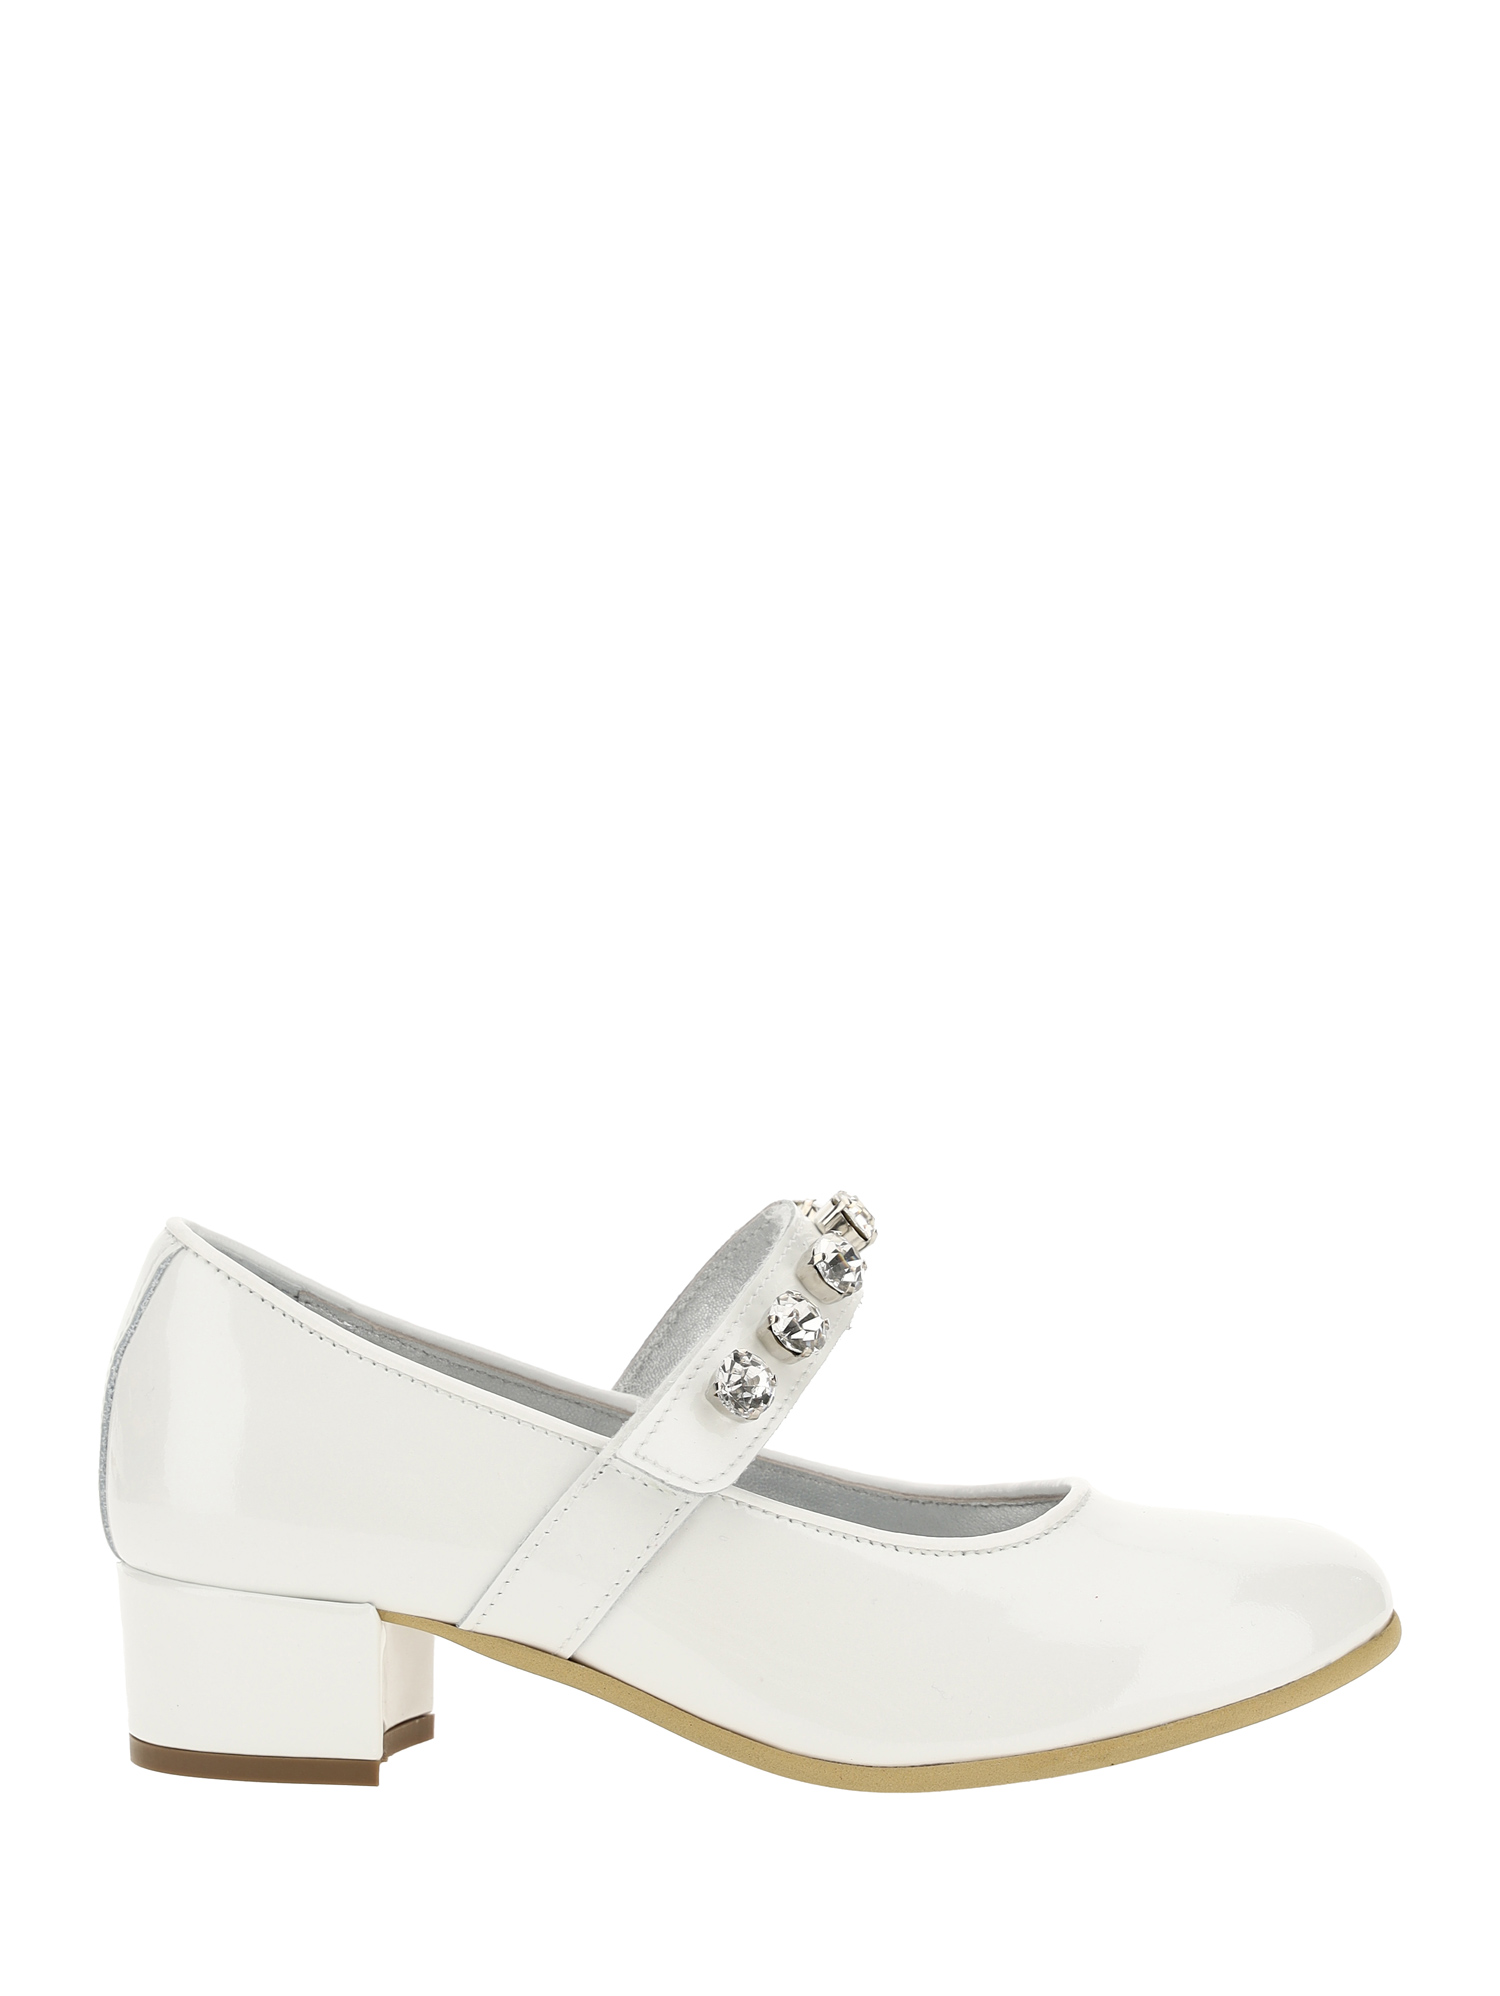 Monnalisa Pearly Patent Leather Ballet Flats In Cream